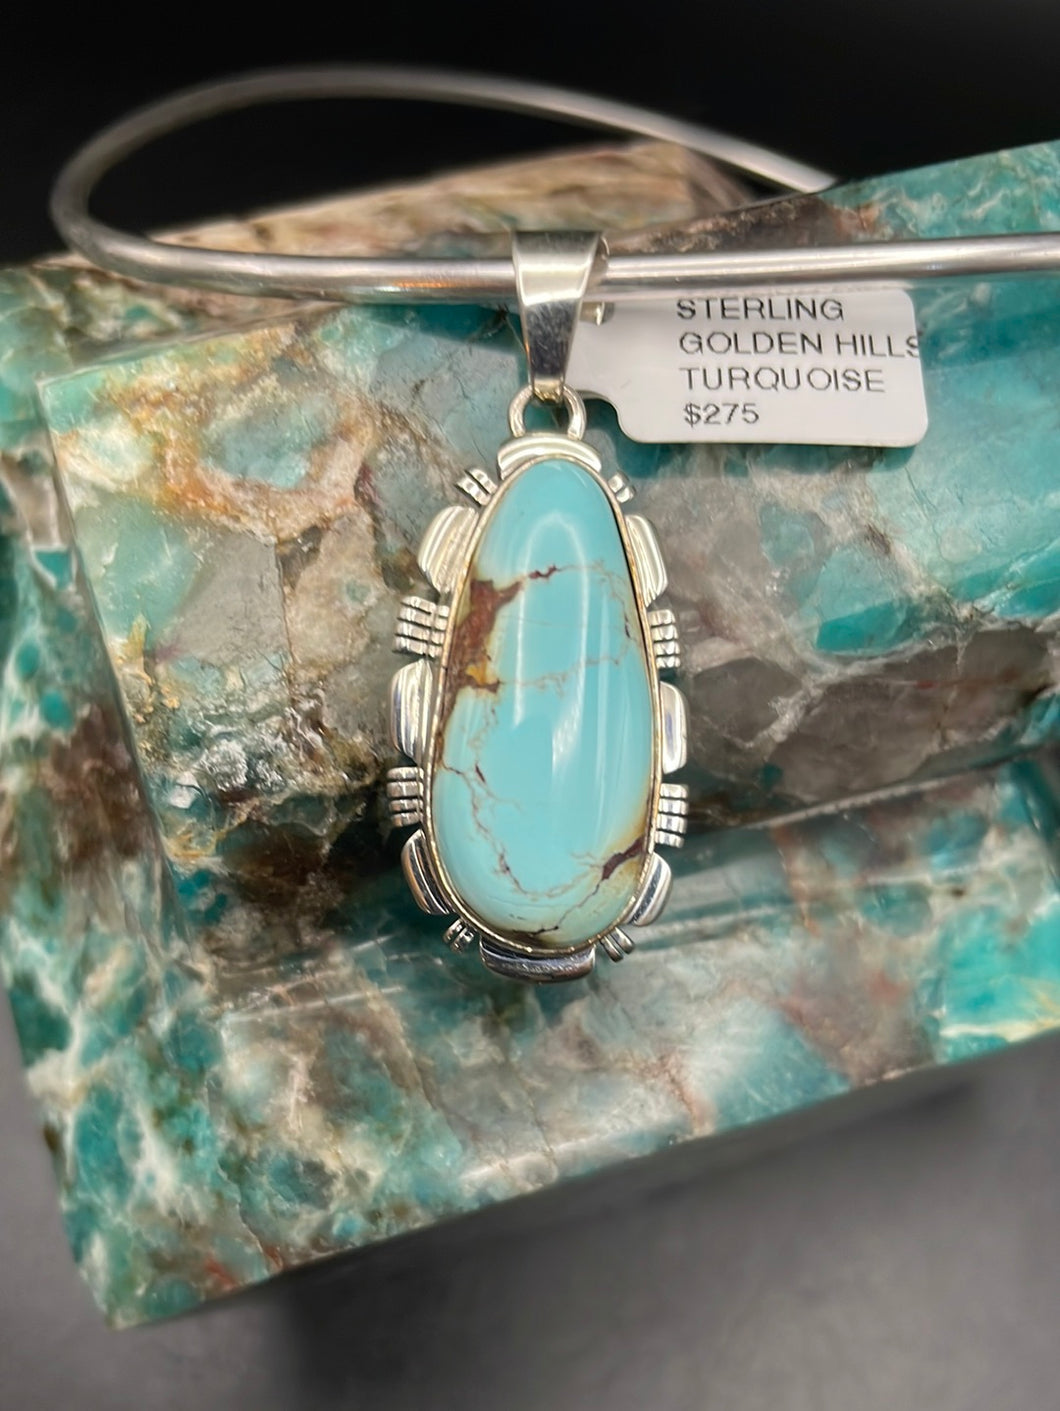 Golden Hills Turquoise and Sterling Silver Pendant